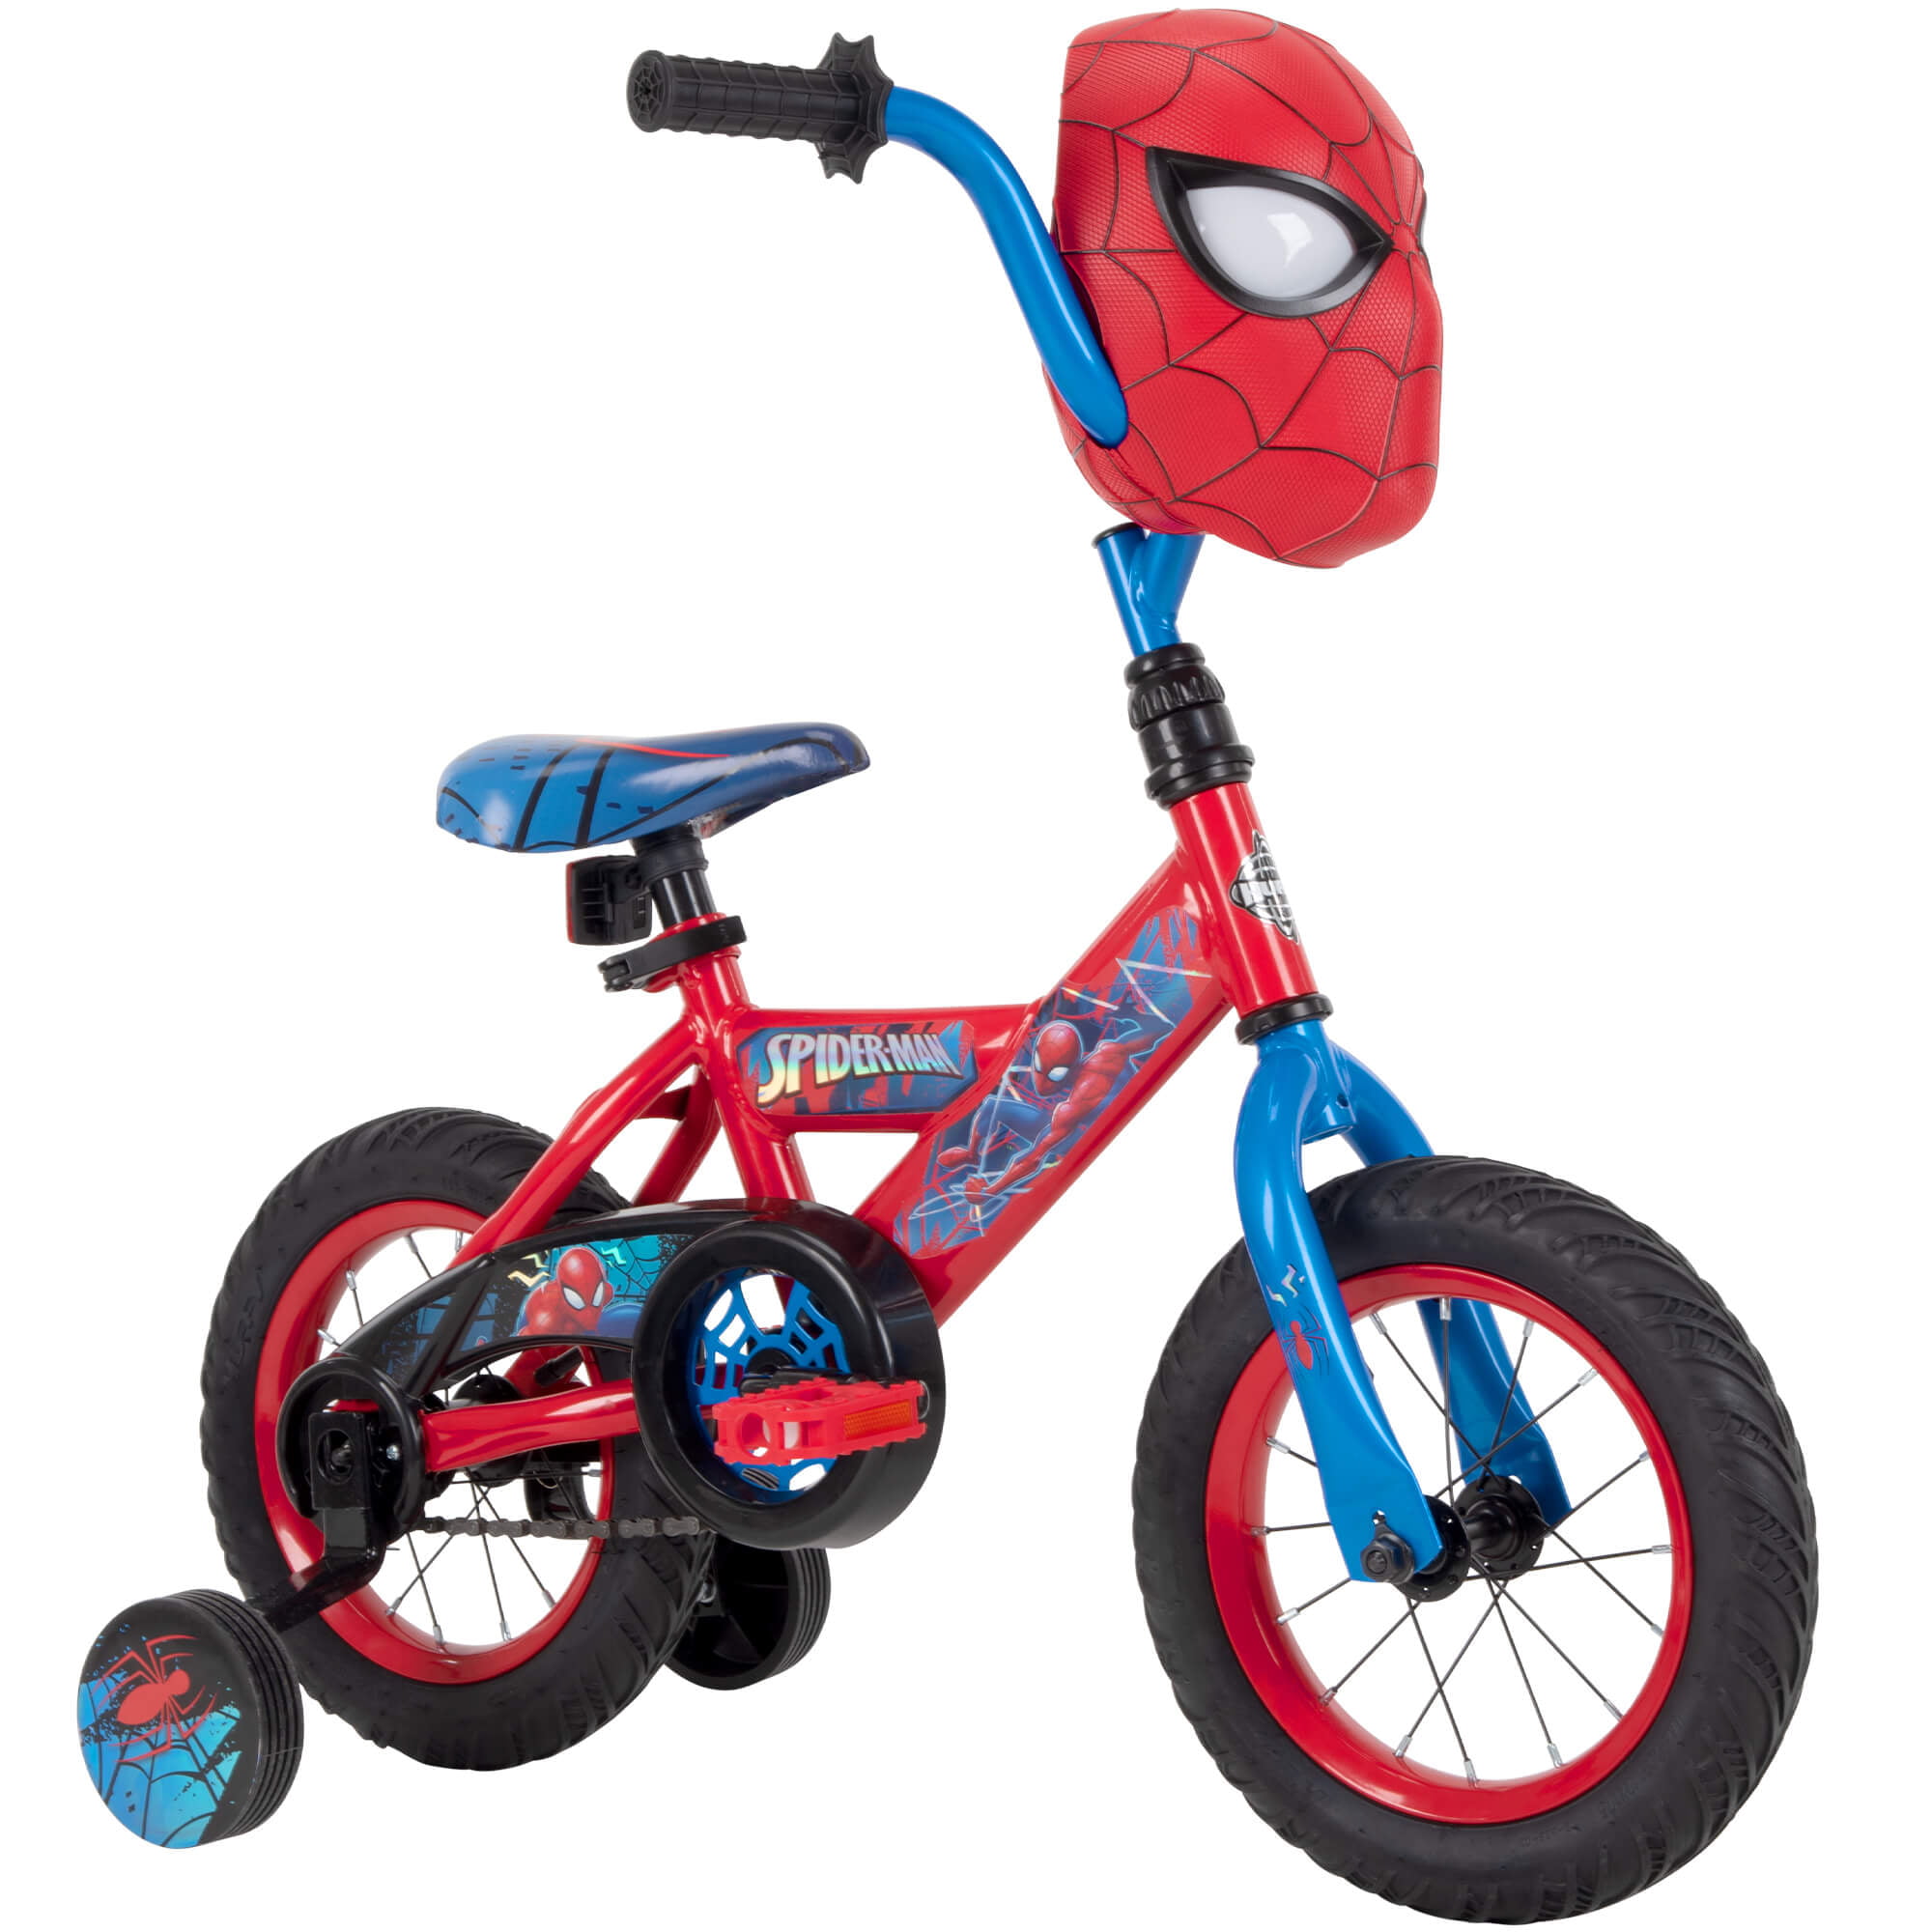 bikes for 4 year olds at walmart